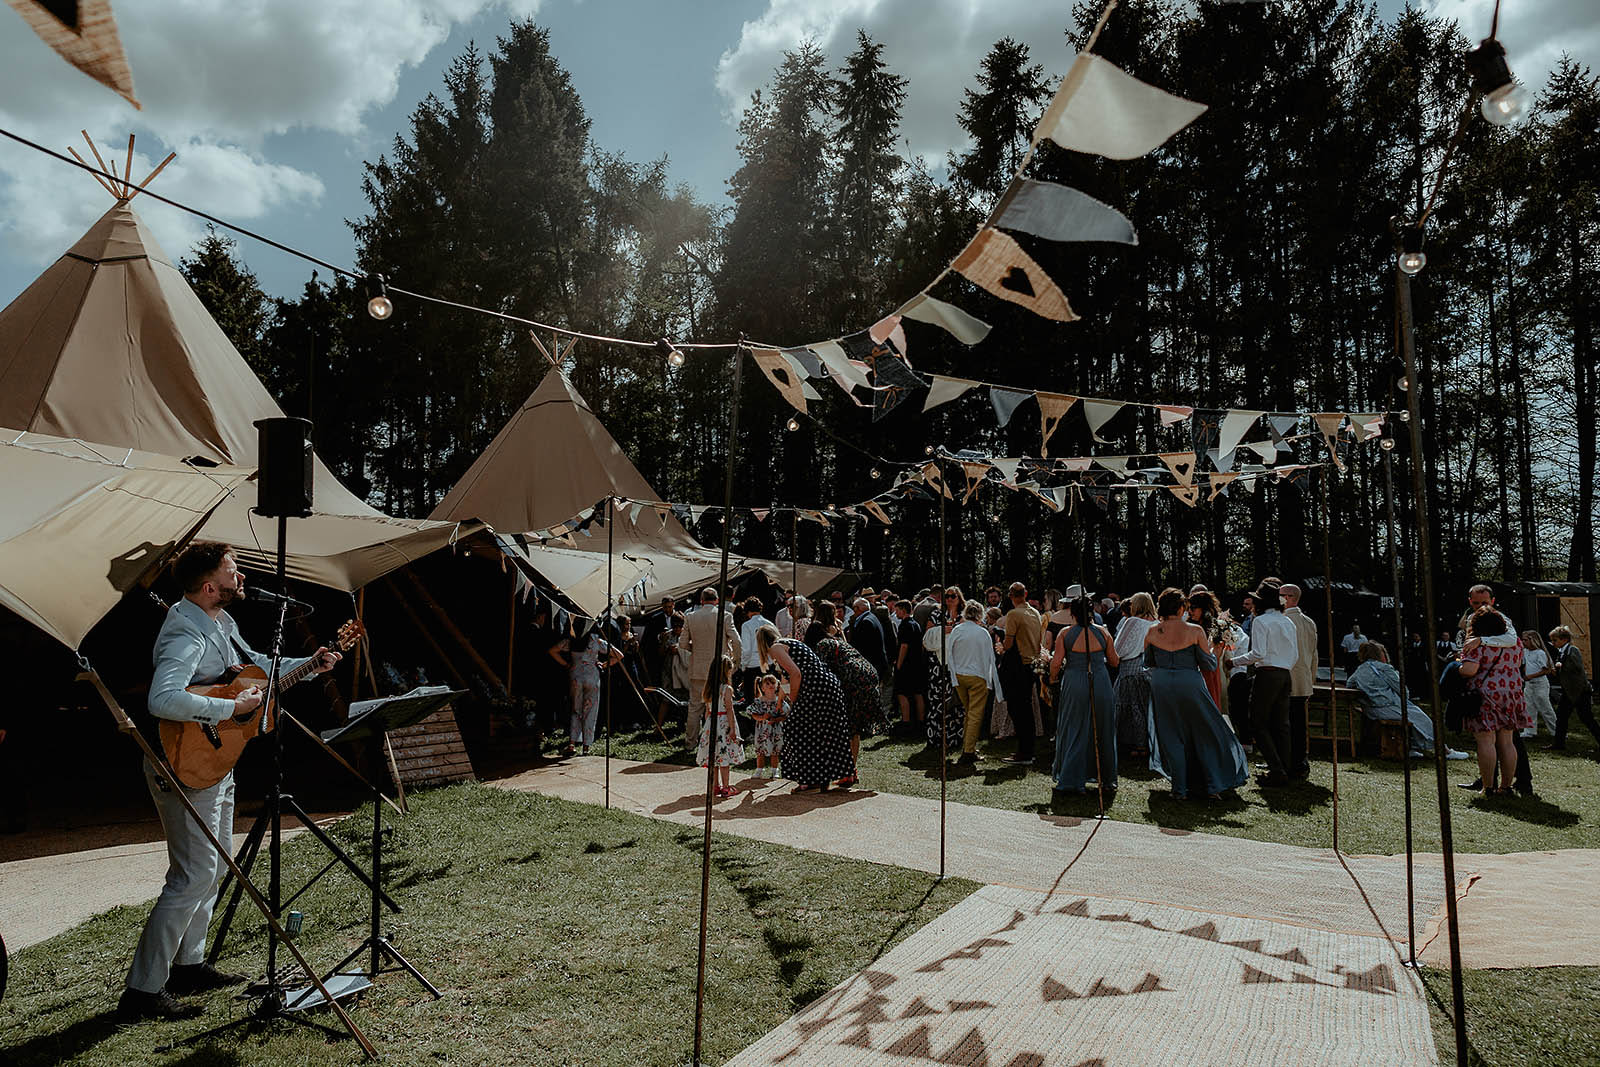 festival style Herefordshire wedding with bunting and tipis